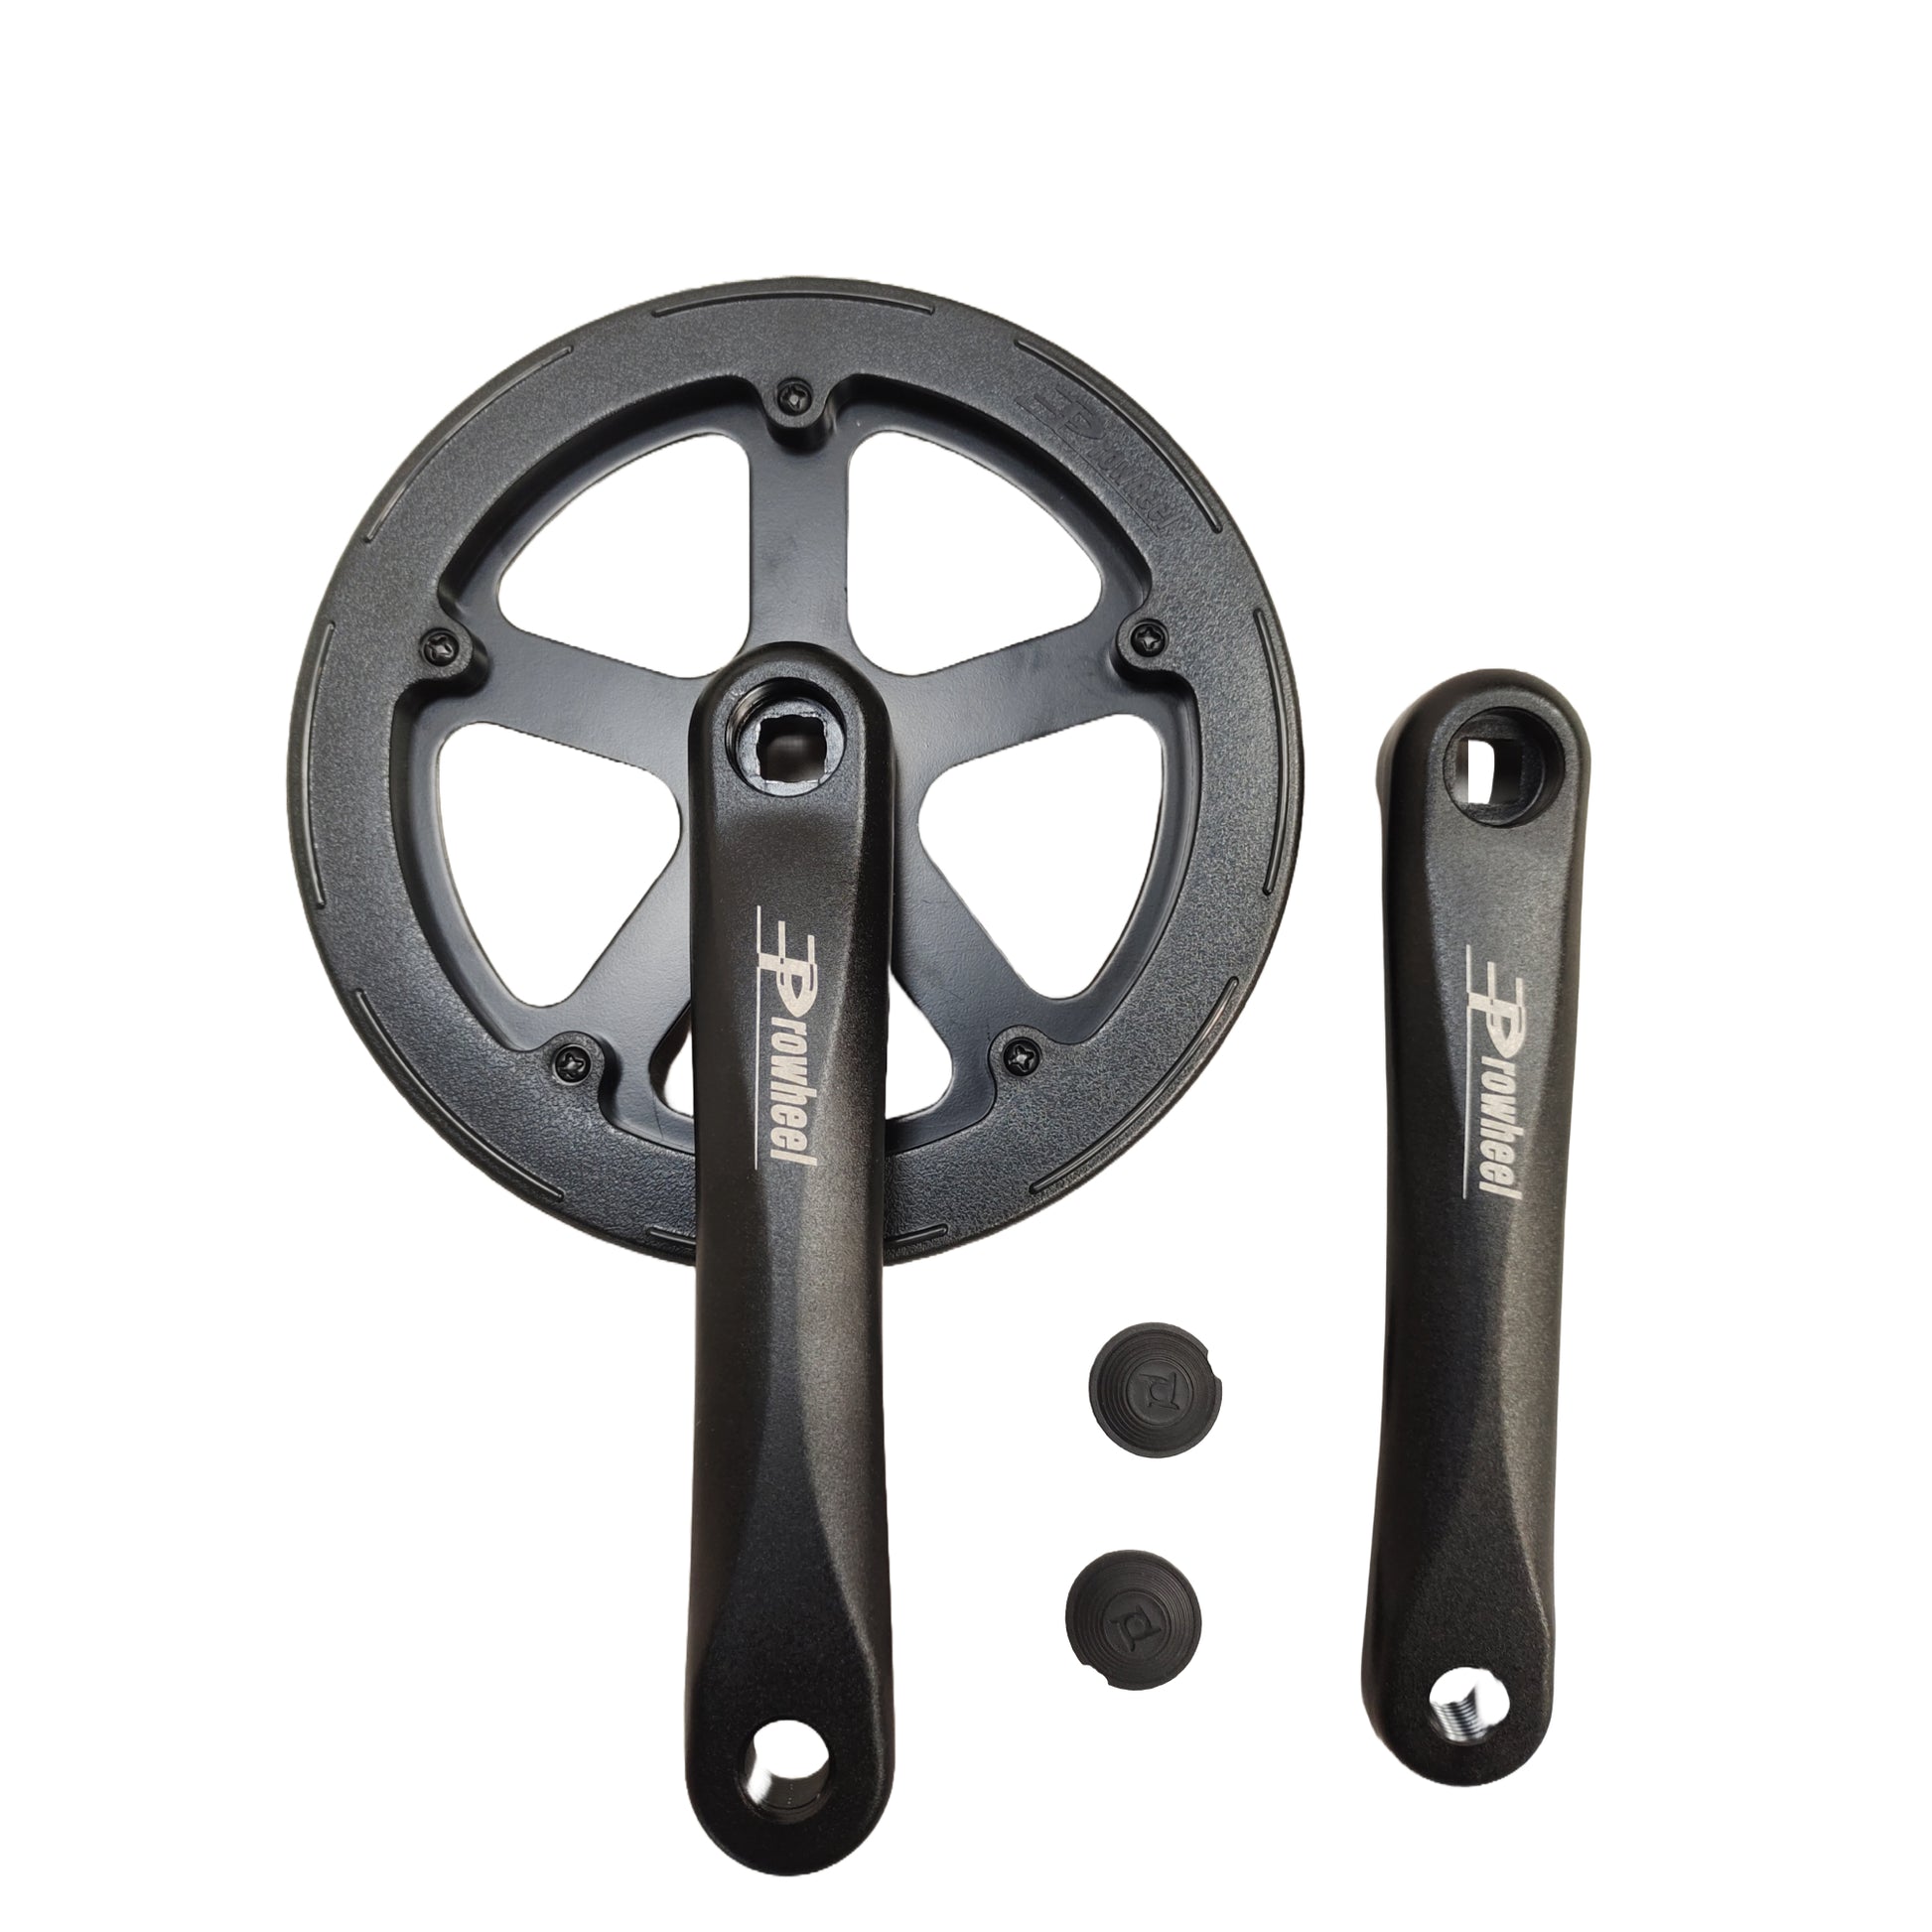 Bicycle crankset prowheel alloy Single speed top view spare part by omobikes